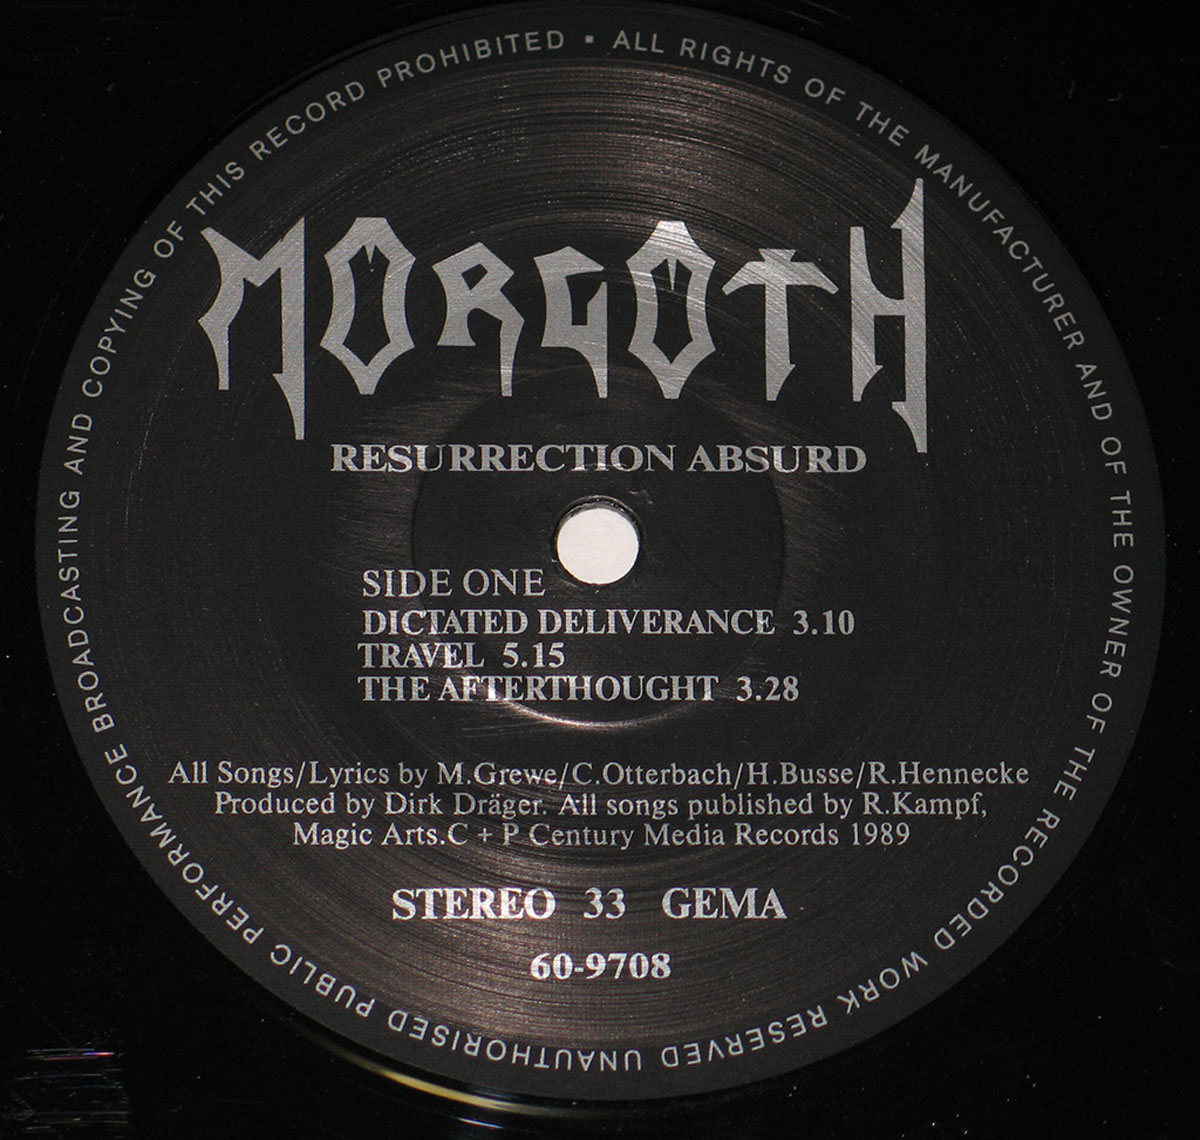 Close up photo of the records label MORGOTH - Resurrection Absurd  